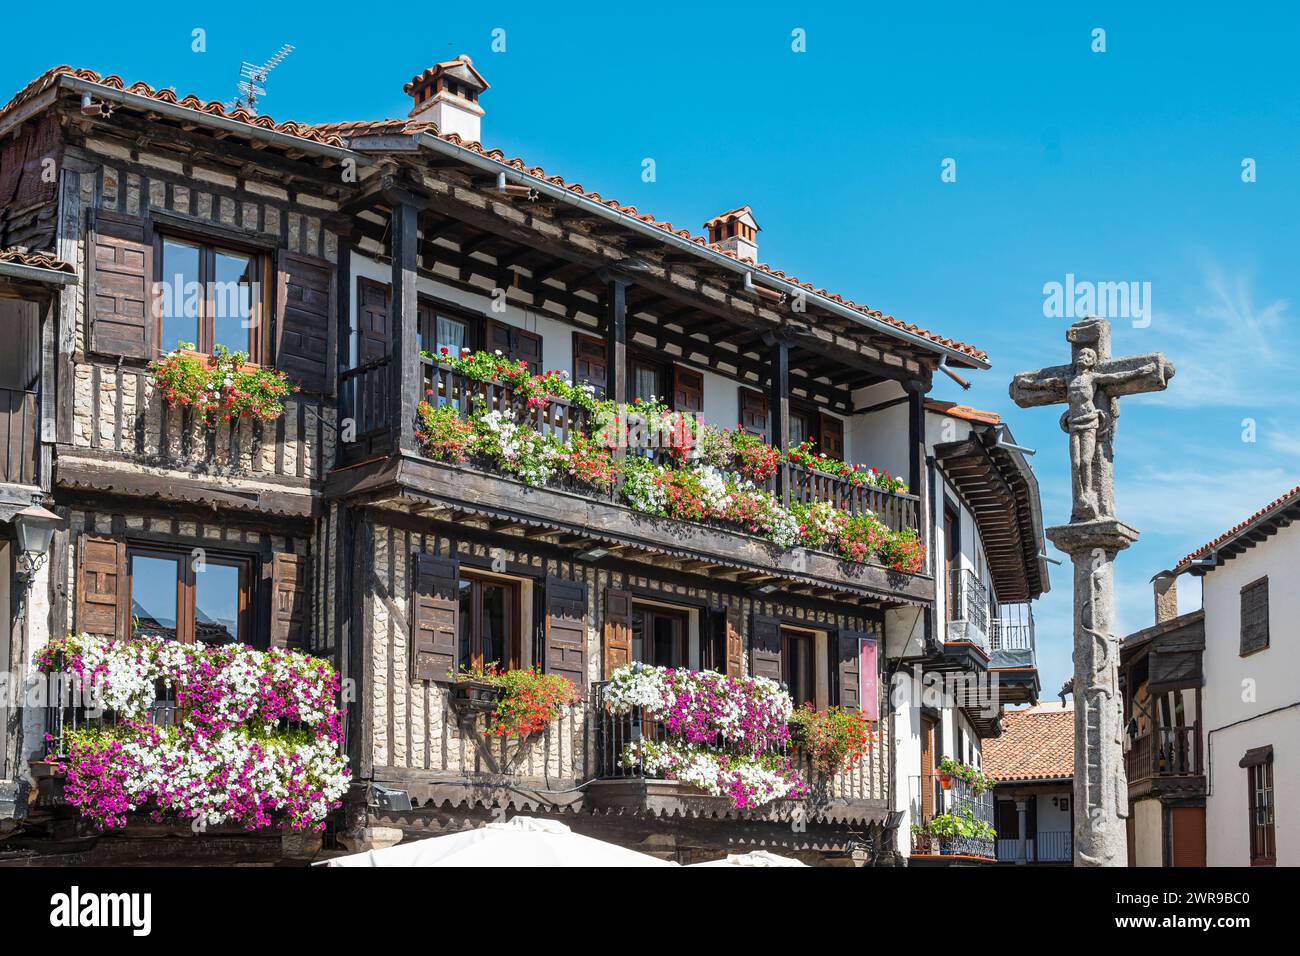 An 18th-century stone cross and beautiful traditional architecture with balconies adorned with pots in the medieval village of La Alberca, Spain Stock Photo